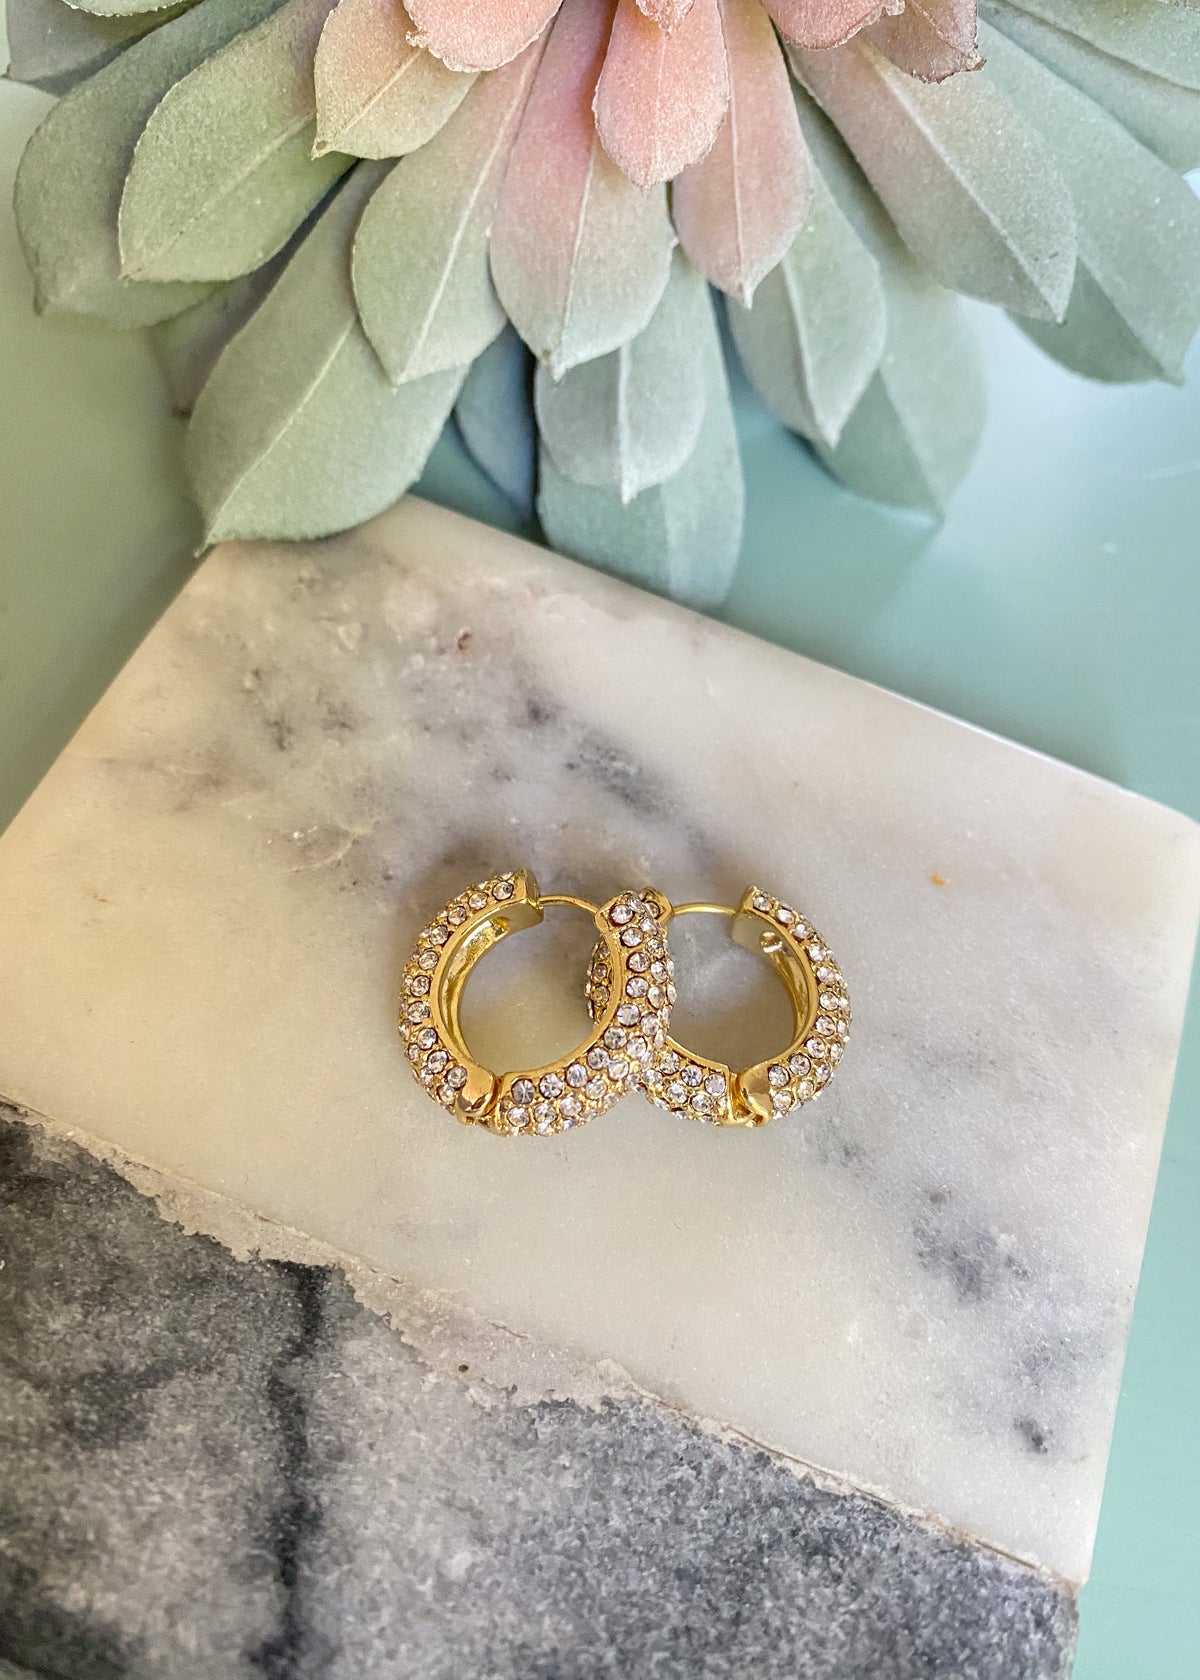 'Darling' Gold with Crystal Huggie Earrings-Blingy and chis crystal filled huggie earrings that can be dressed up or down!-Cali Moon Boutique, Plainville Connecticut